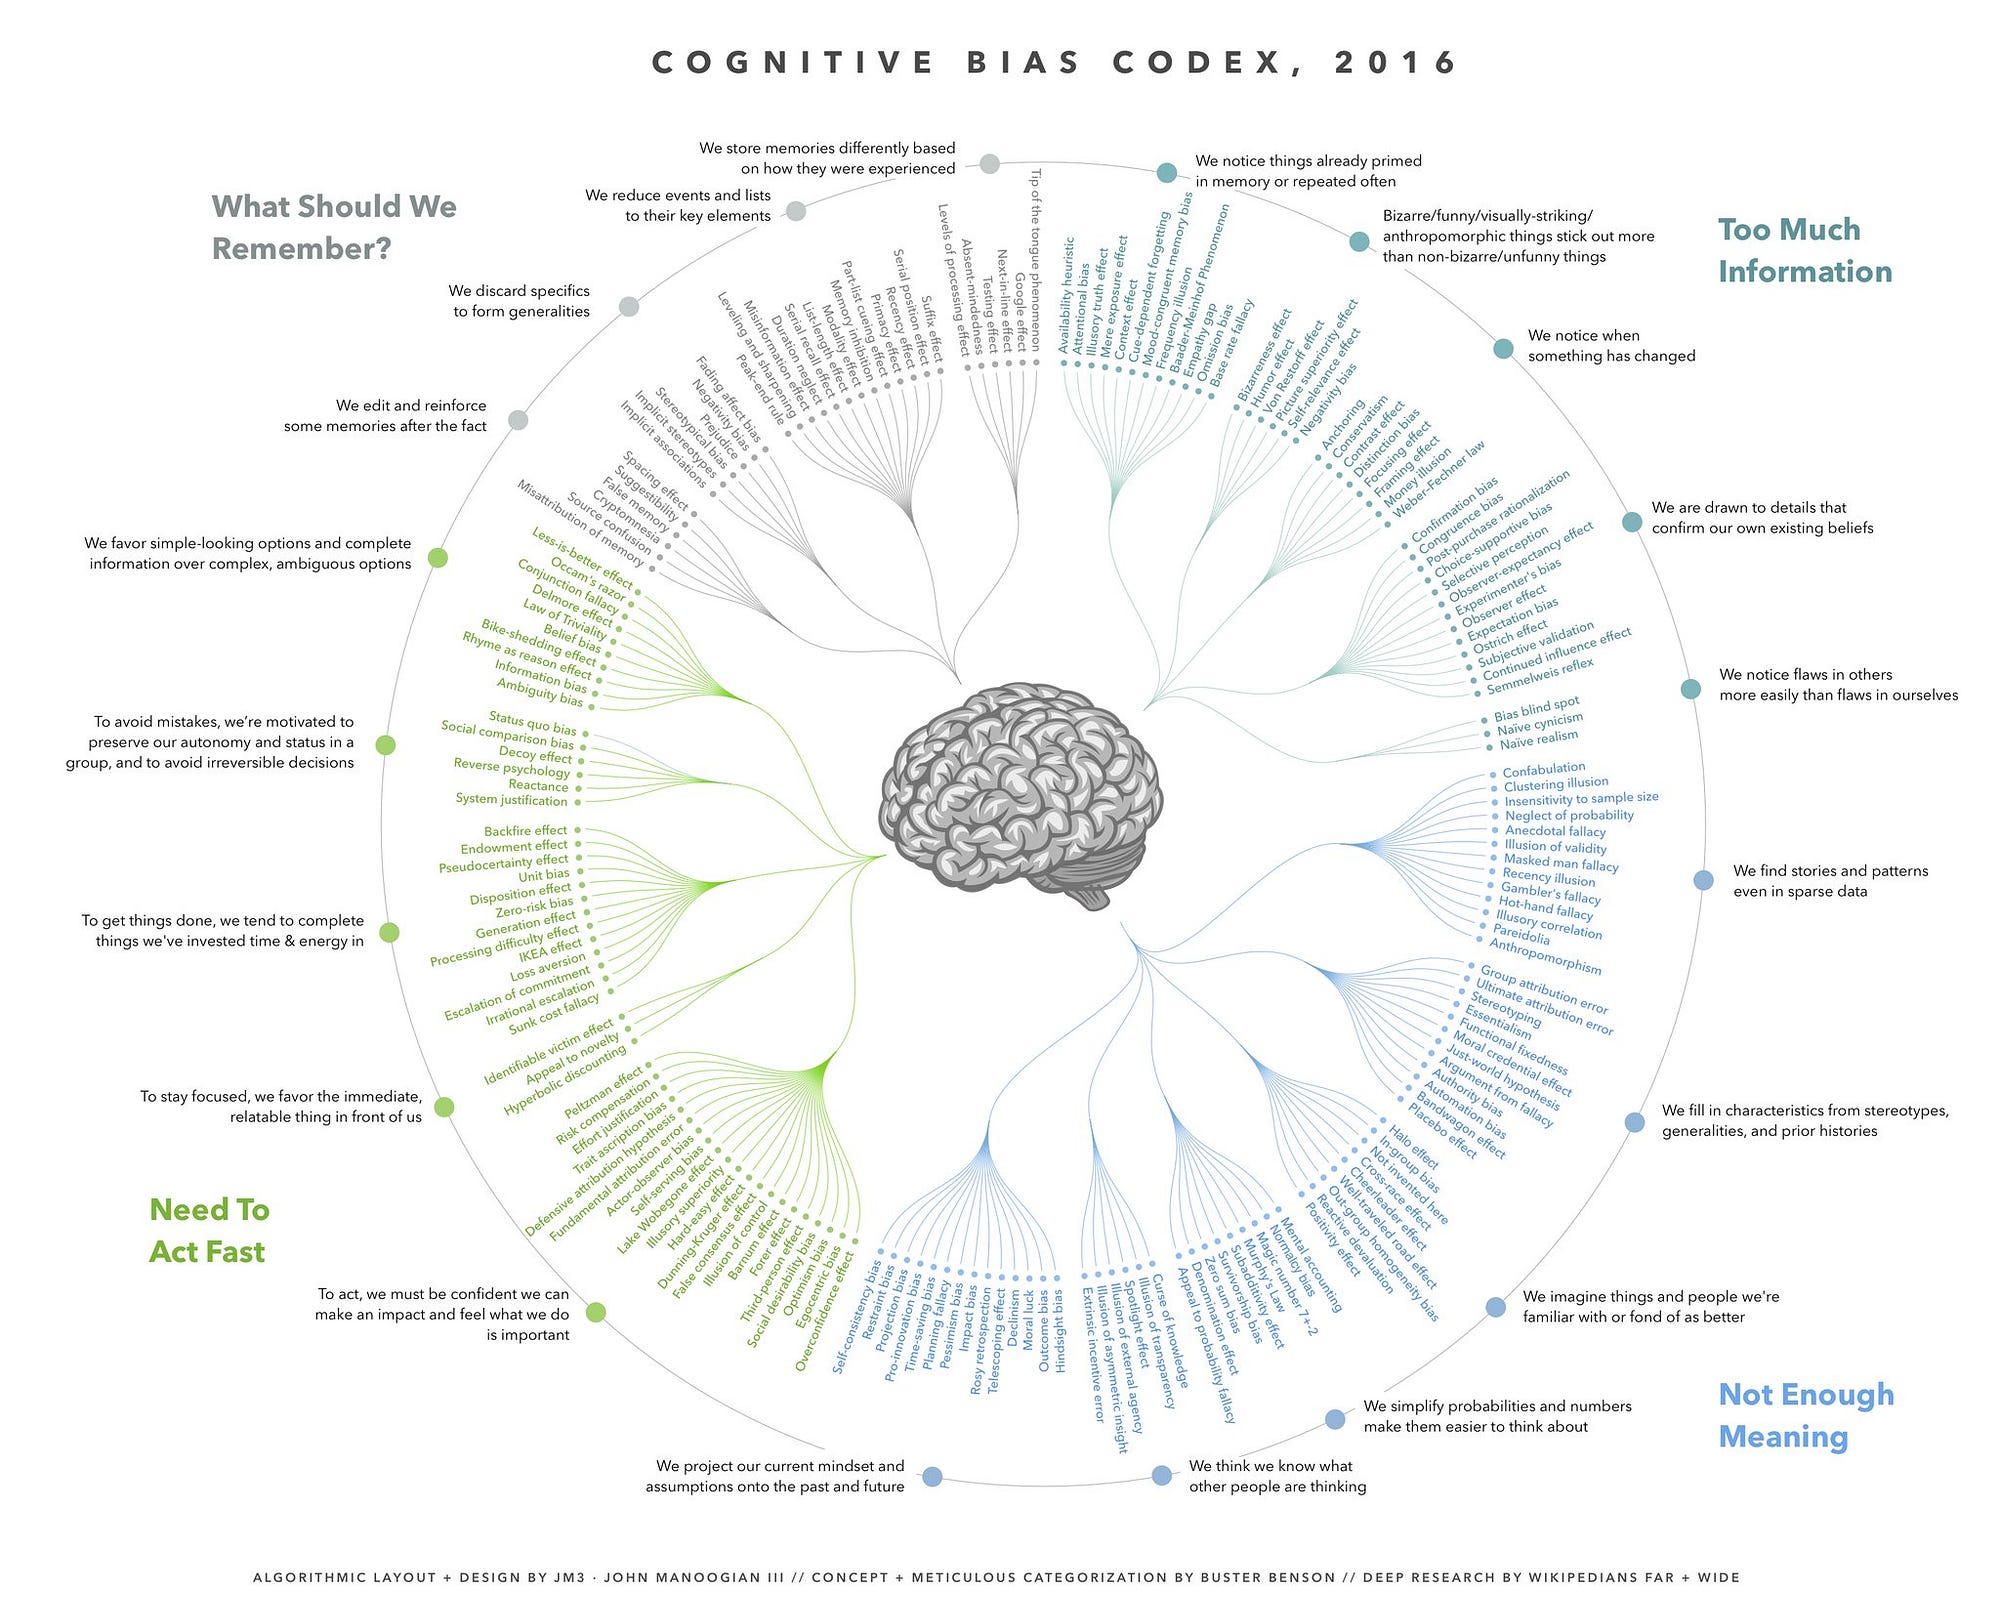 Overwhelming infographic that looks like a spiderweb with tiny text grouping all the different kinds of cognitive biases.